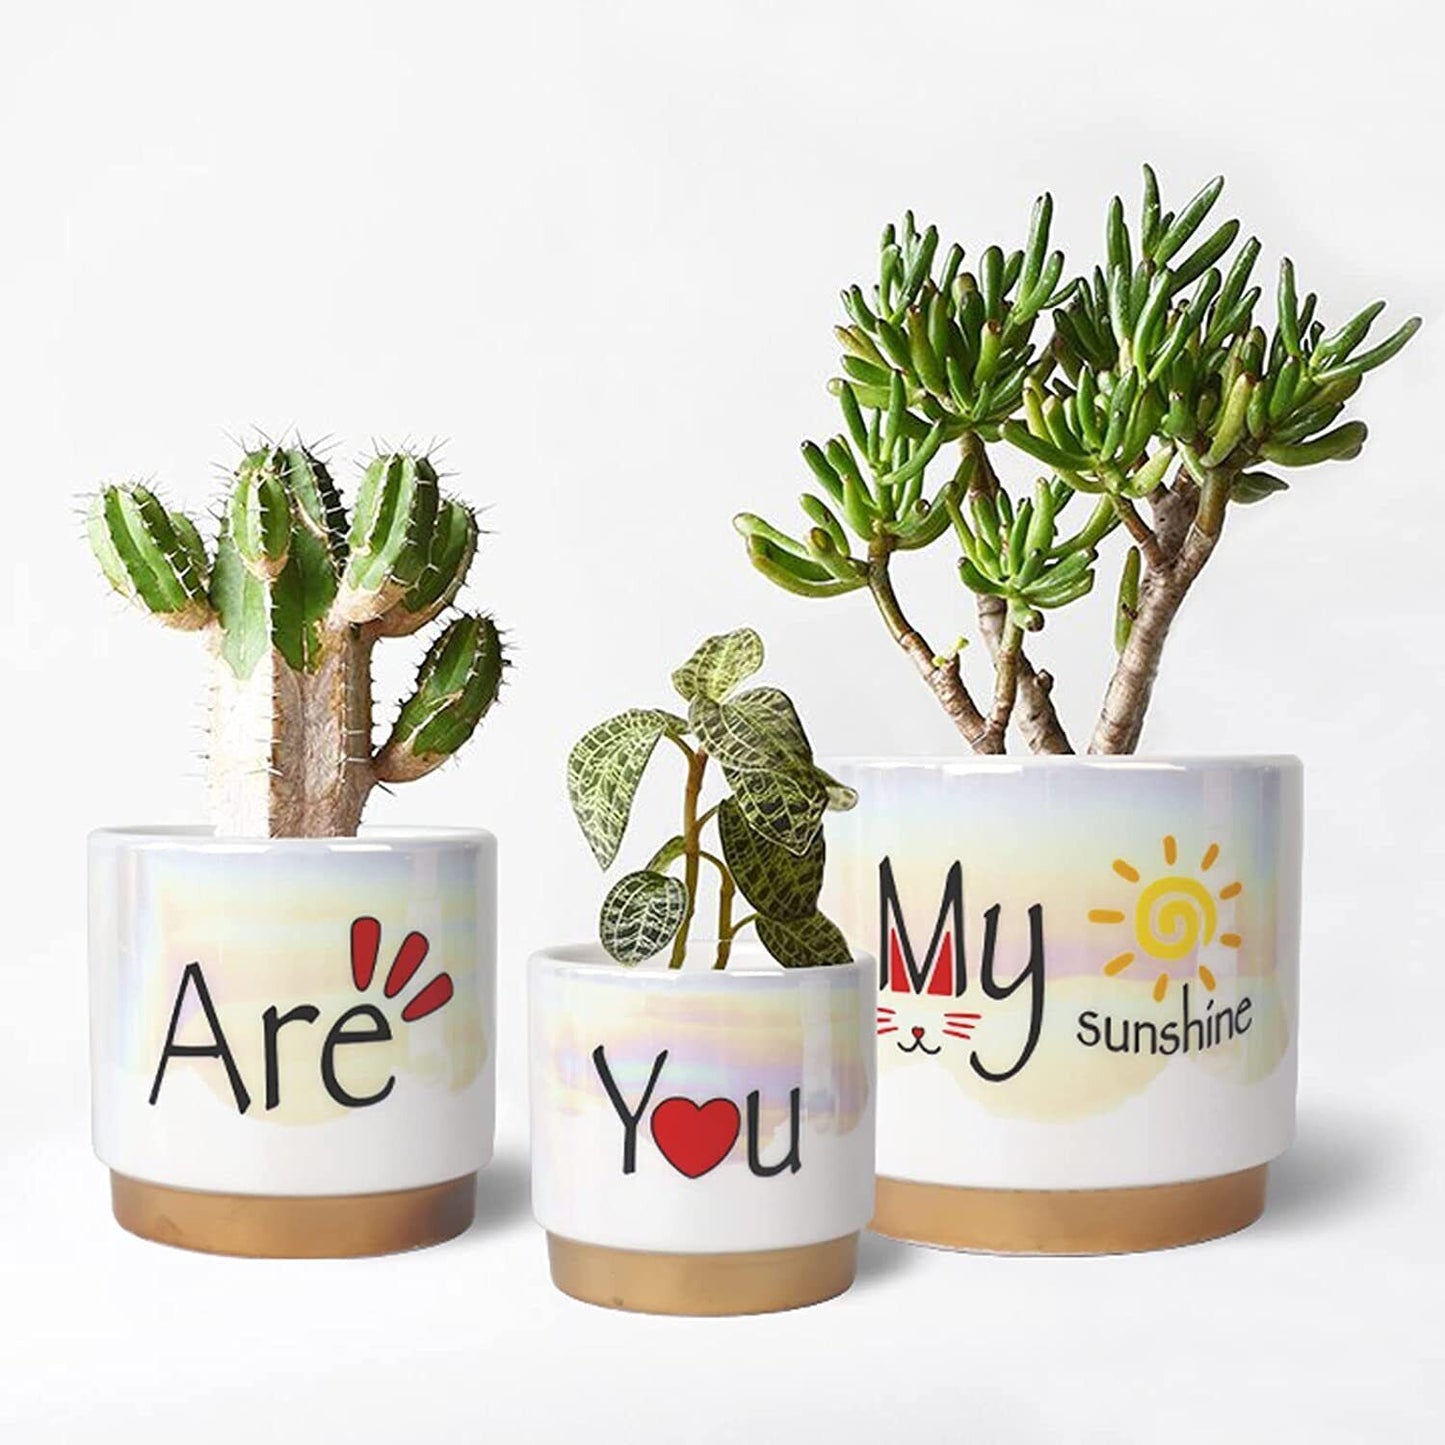 3 Indoor Plant Pots Plants Drainage Holes-Gift-Wrapped, Ceramic Planter You are My Sunshine